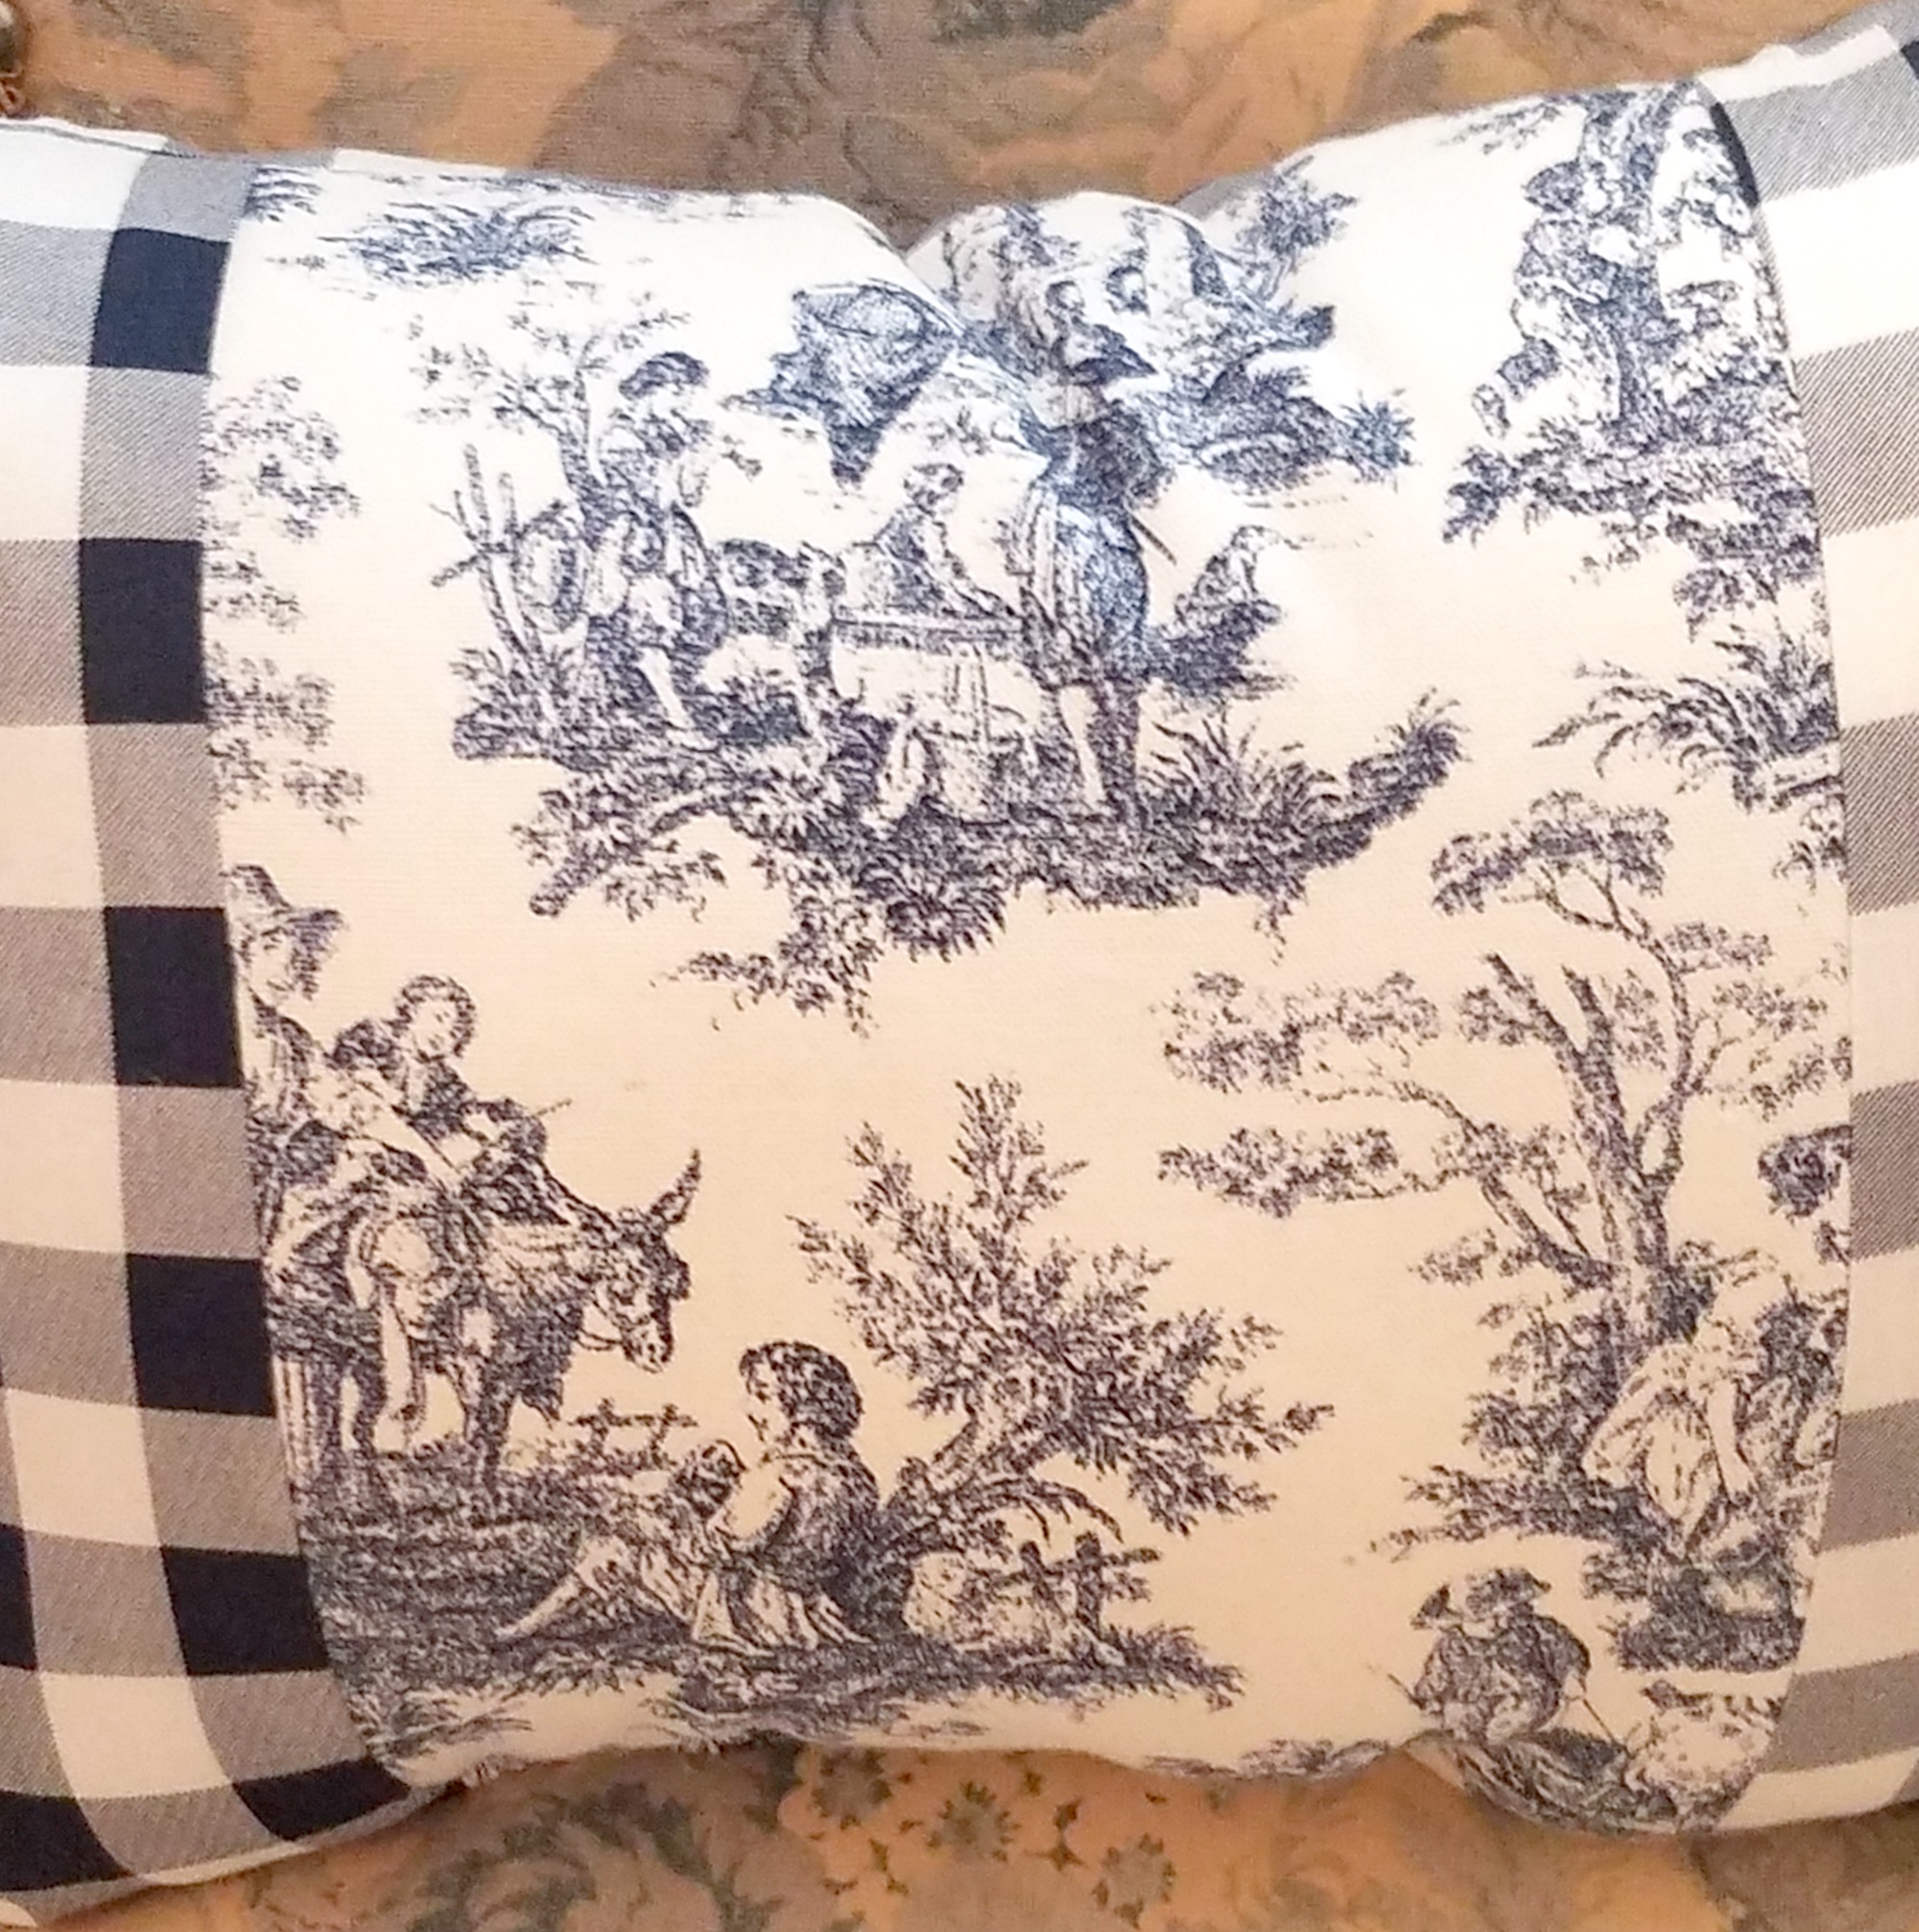 https://www.lisascreativedesigns.com/wp-content/uploads/2016/01/Blue-and-White-Toile-French-Country-Pillow.jpg